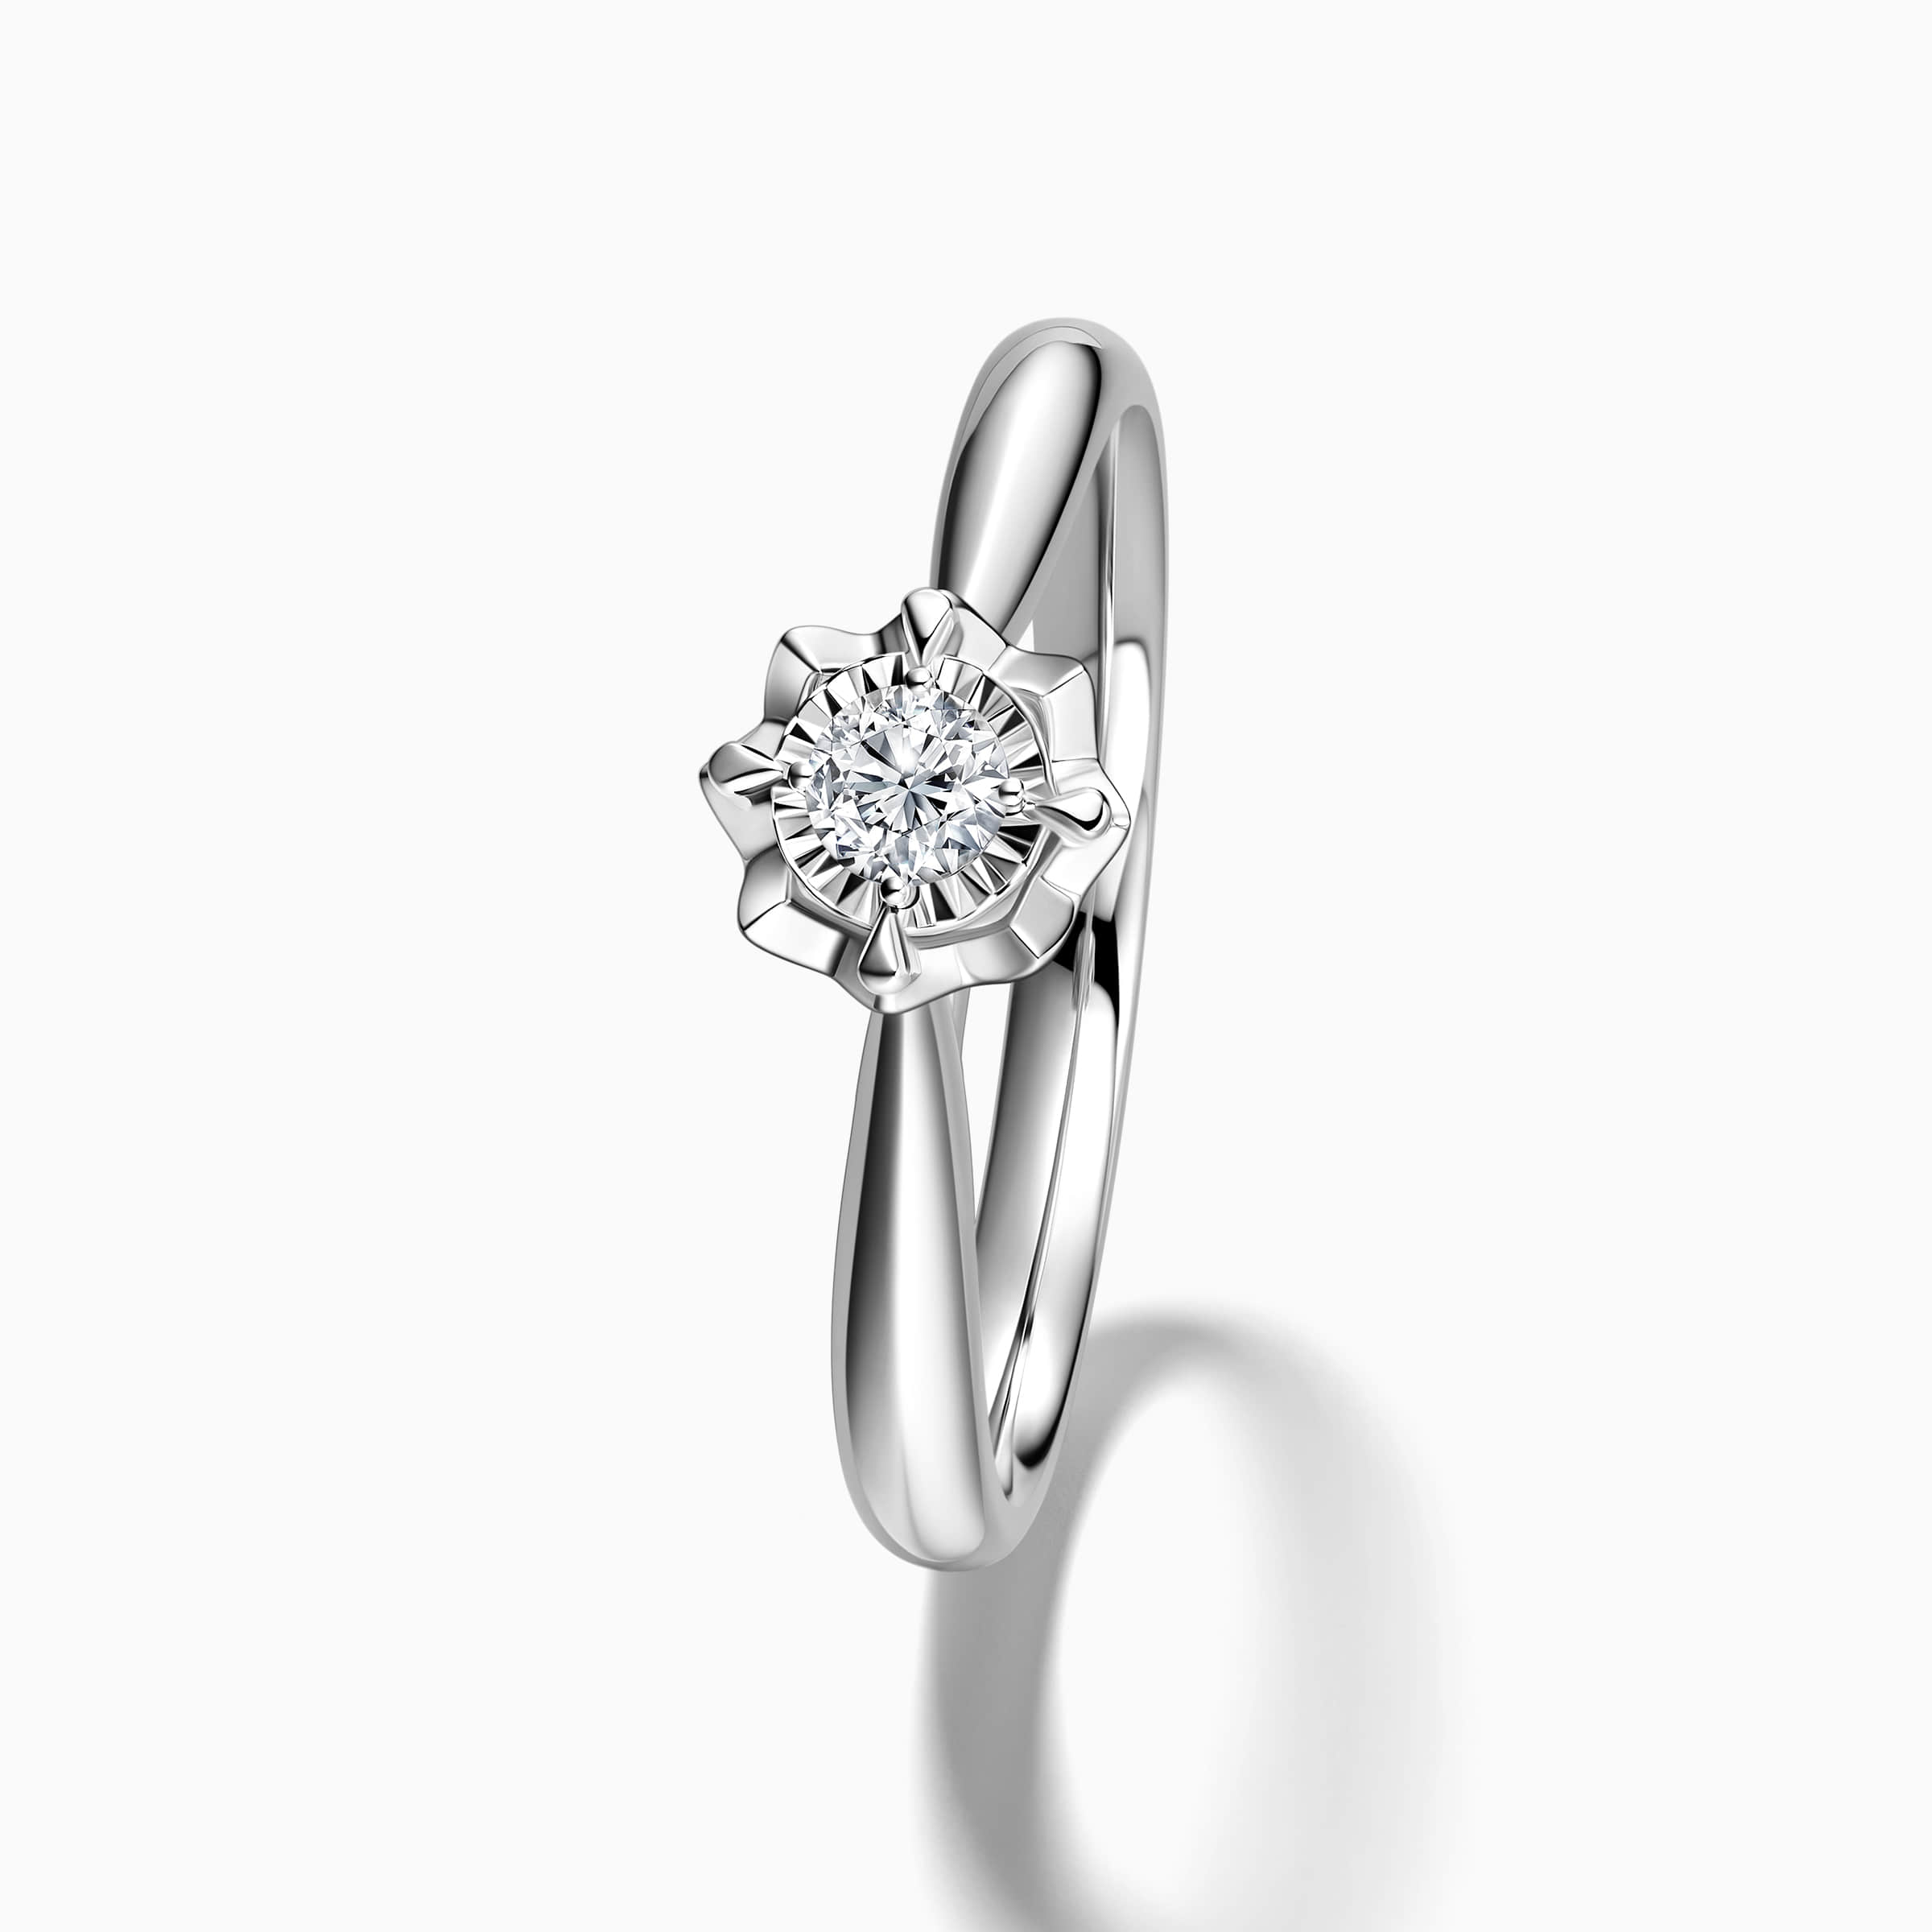 Darry Ring flower promise ring angle view